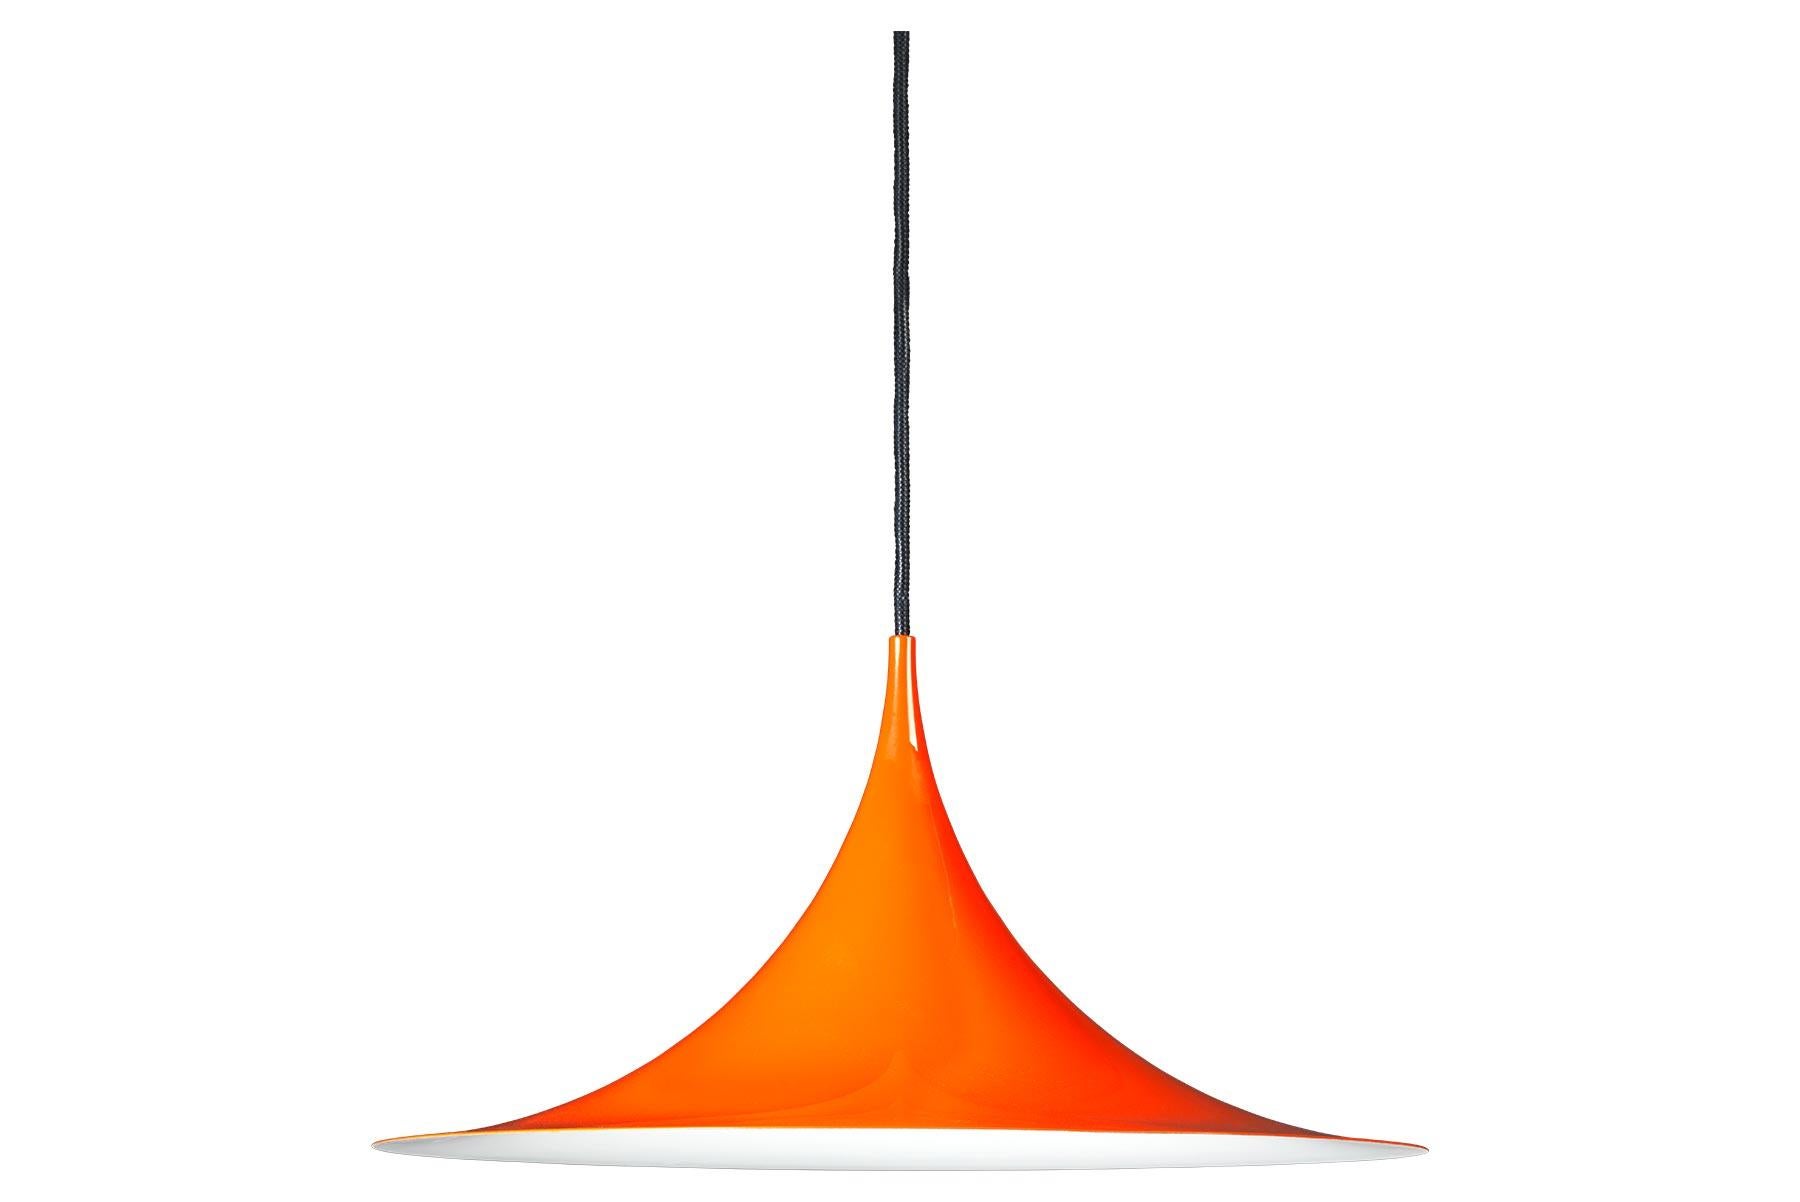 The Semi Pendant is a unique pendant lamp, based on two quarter-circles put together, back-to-back. It’s distinctive arch-shaped, enamelled metal shade creates a diffused, cone-shaped light, ideal over a dining table or kitchen work surface. With